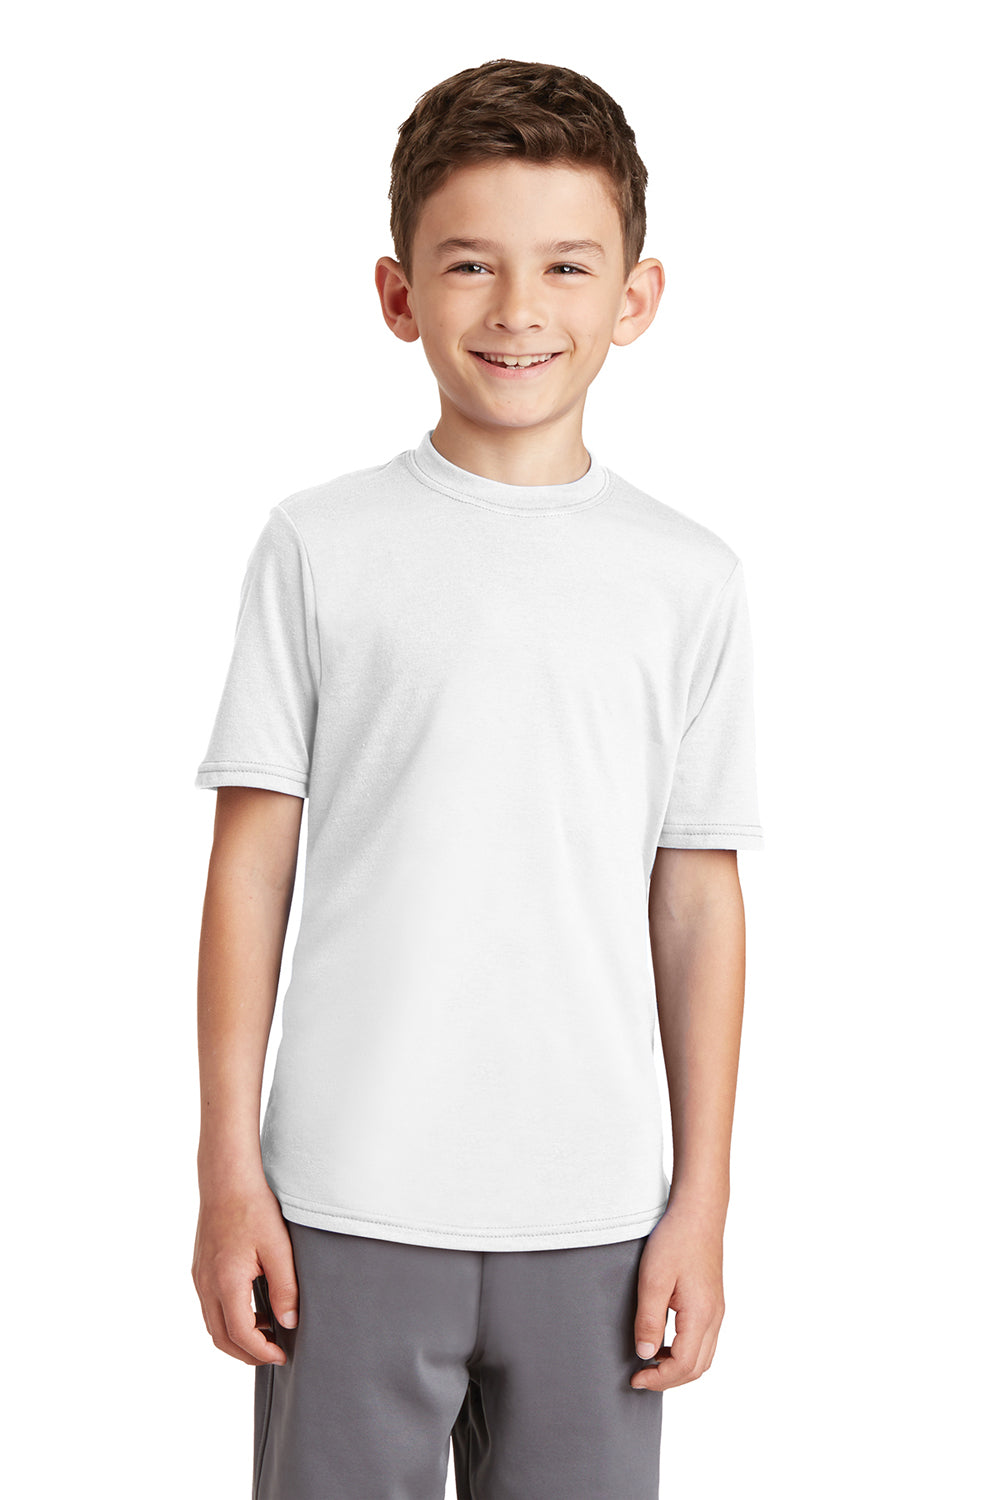 Port & Company PC381Y Youth Dry Zone Performance Moisture Wicking Short Sleeve Crewneck T-Shirt White Front